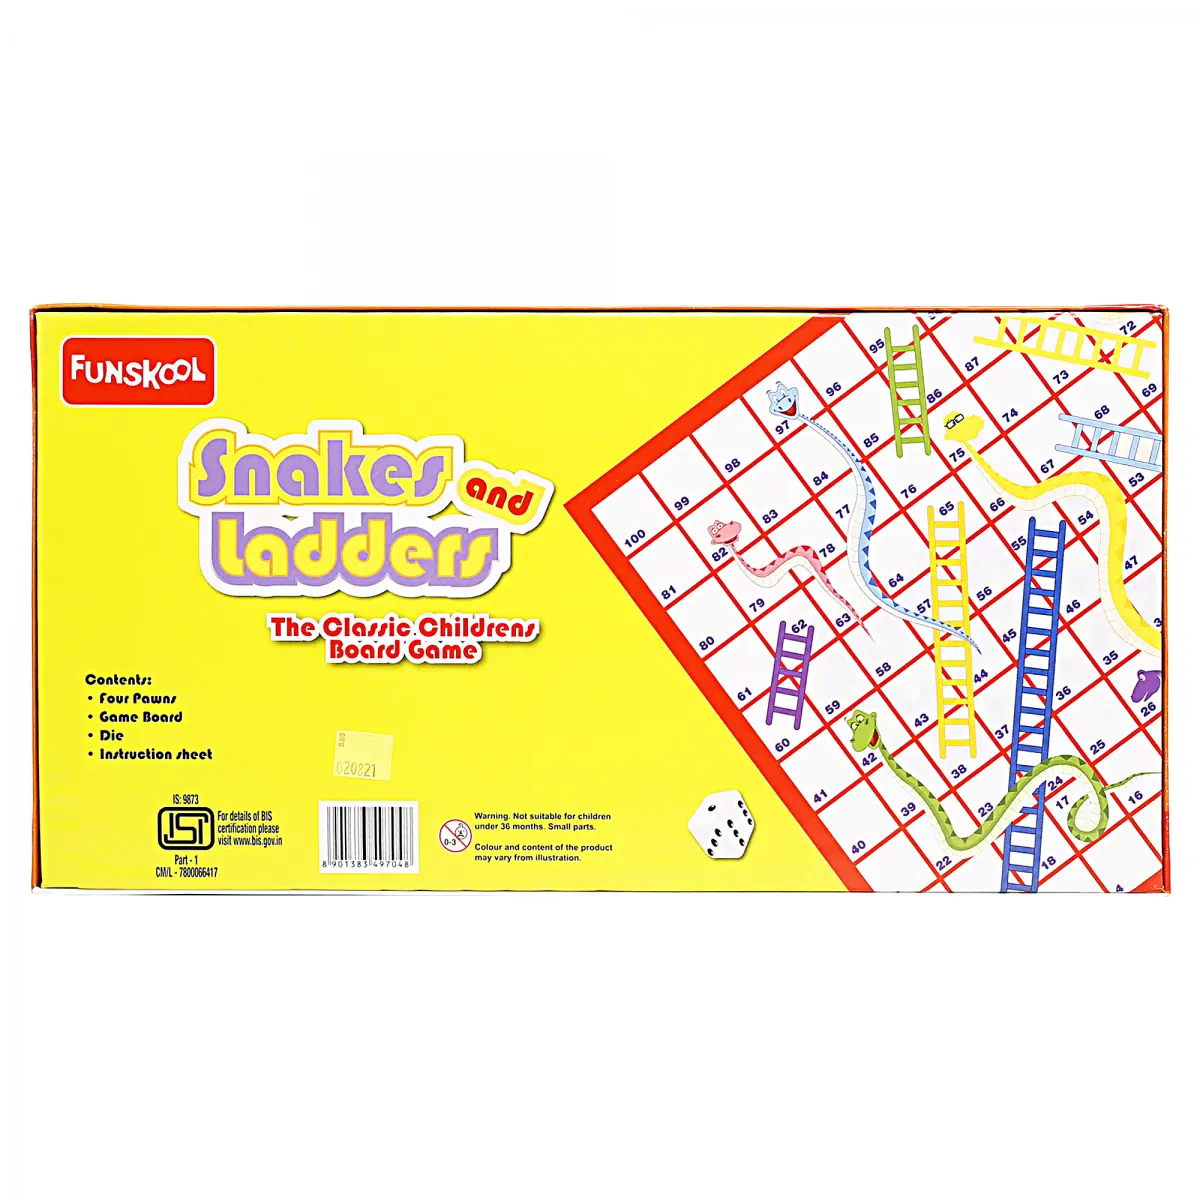 Funskool Snakes & Ladder Classic Board Games for Kids, 2-4Players, 4Y+, Multicolour